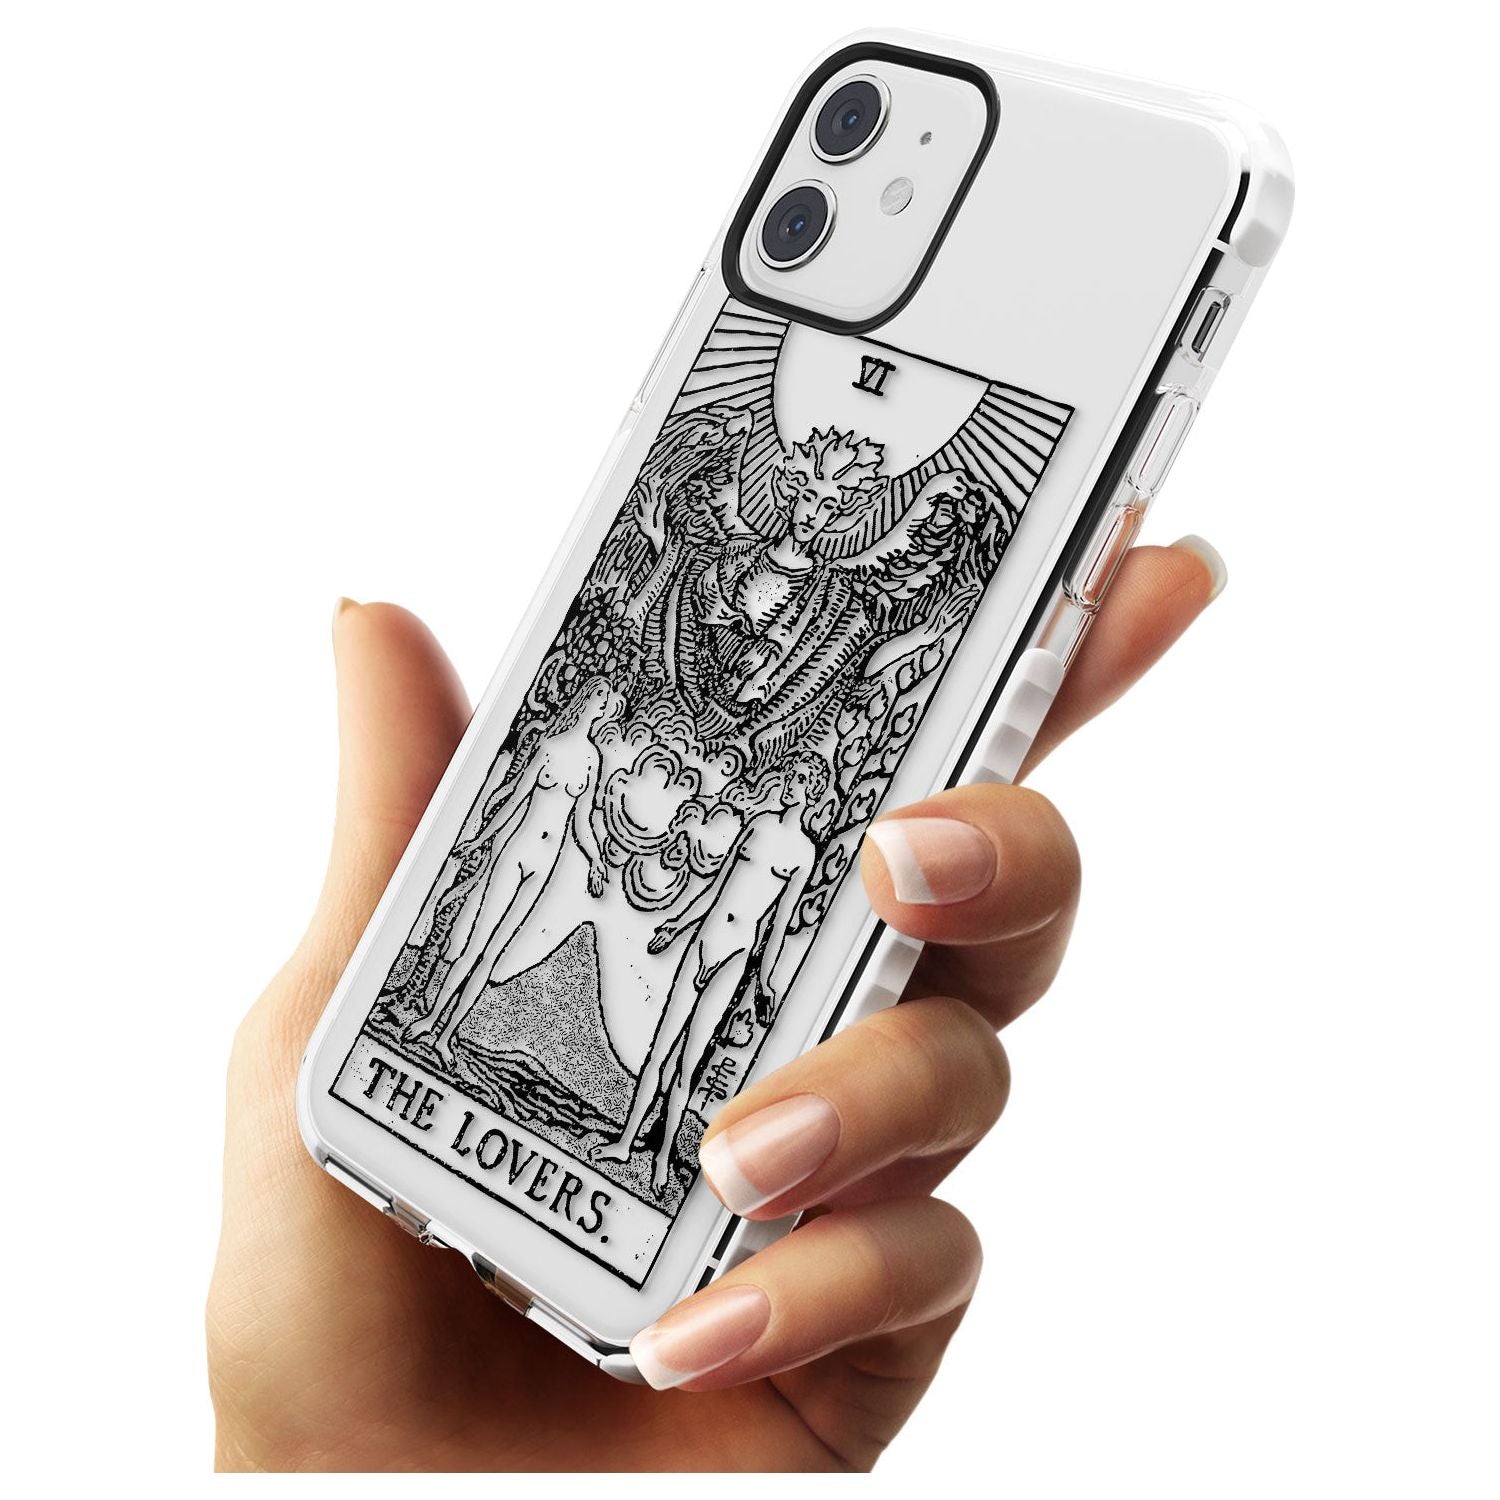 The Lovers Tarot Card - Transparent Slim TPU Phone Case for iPhone 11